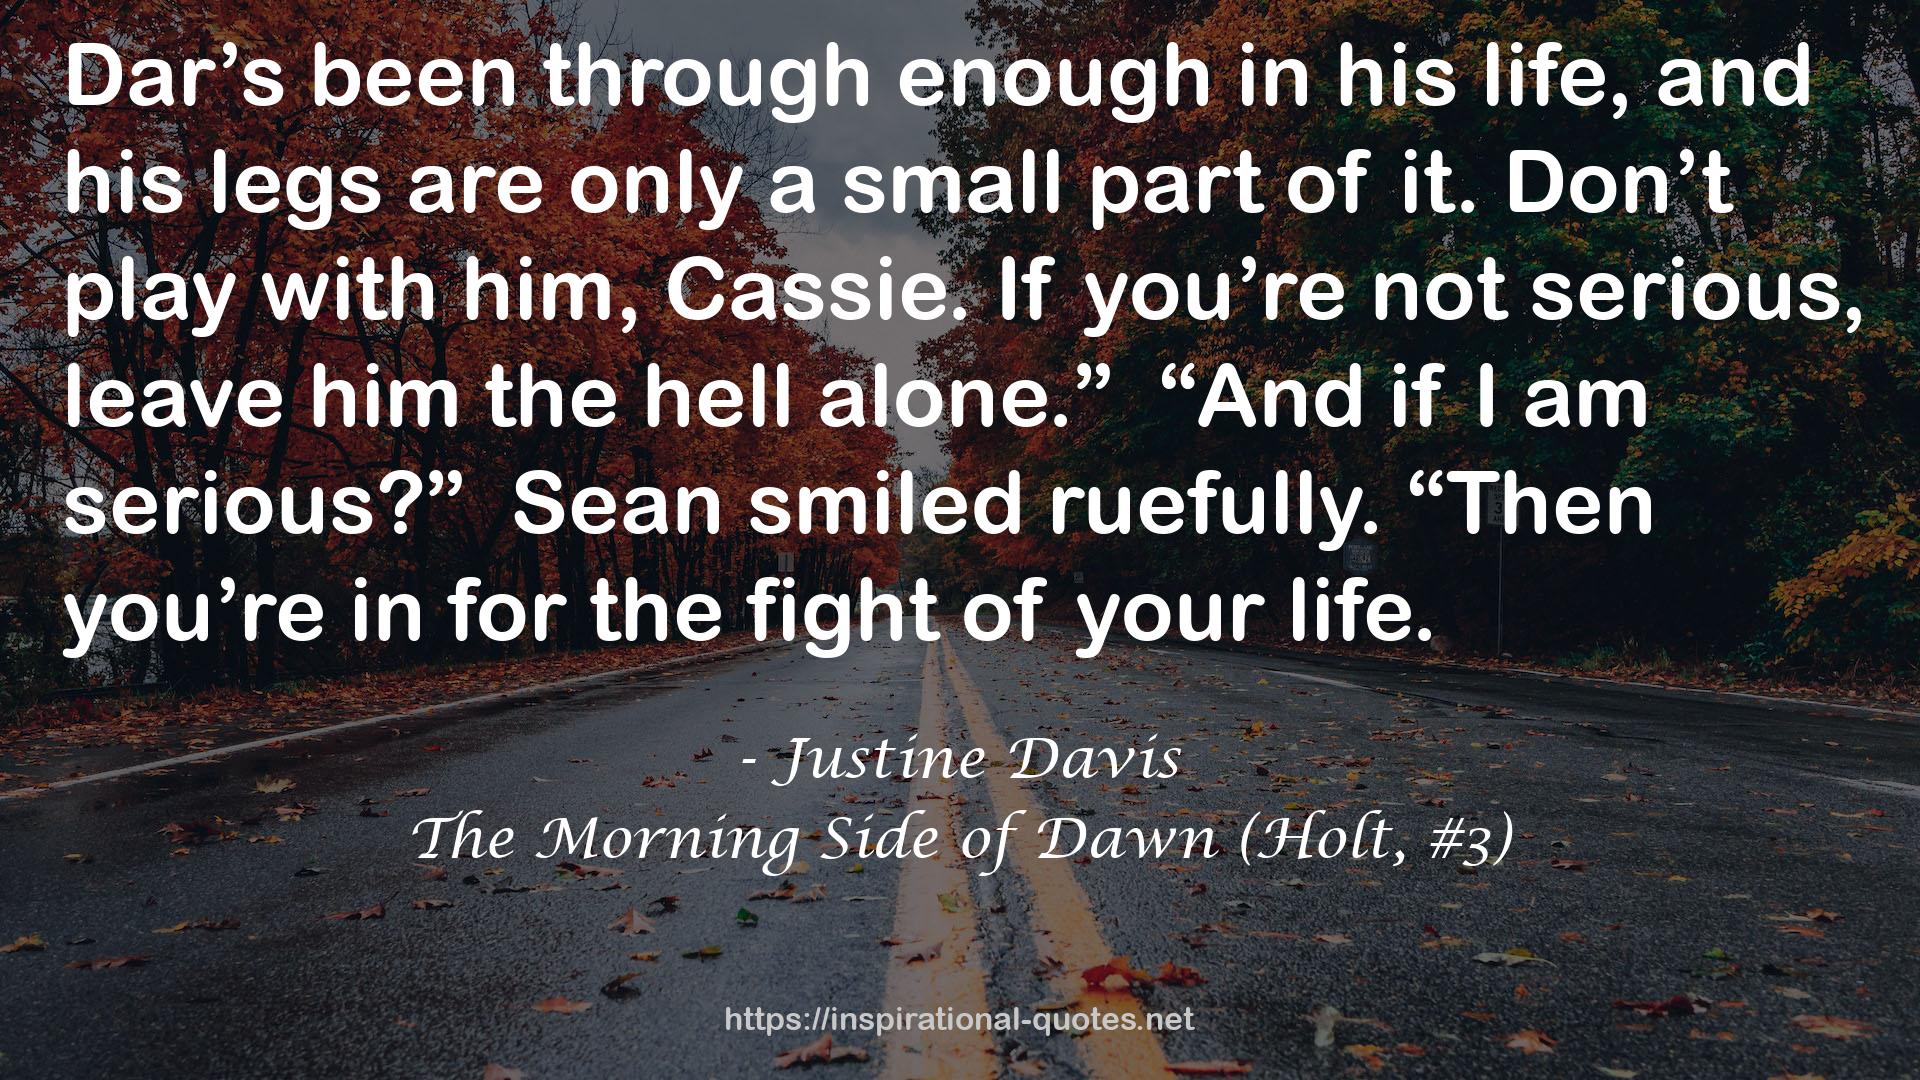 The Morning Side of Dawn (Holt, #3) QUOTES